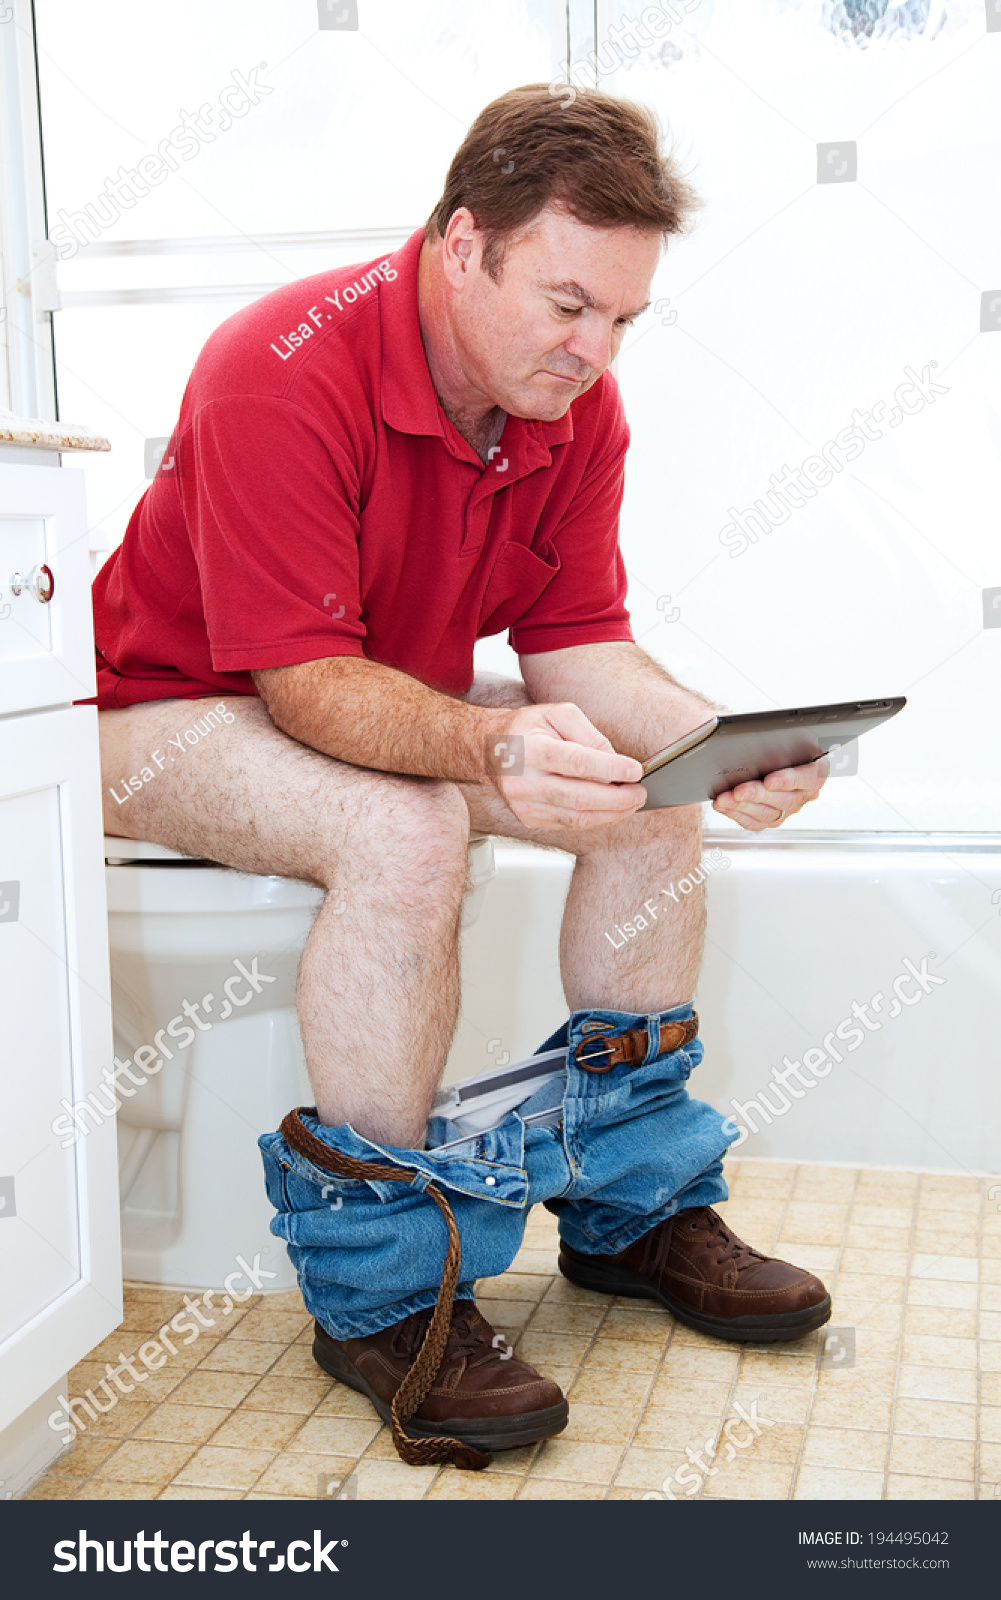 Mature Man On The Toilet Reading Newspaper Stock Photo 